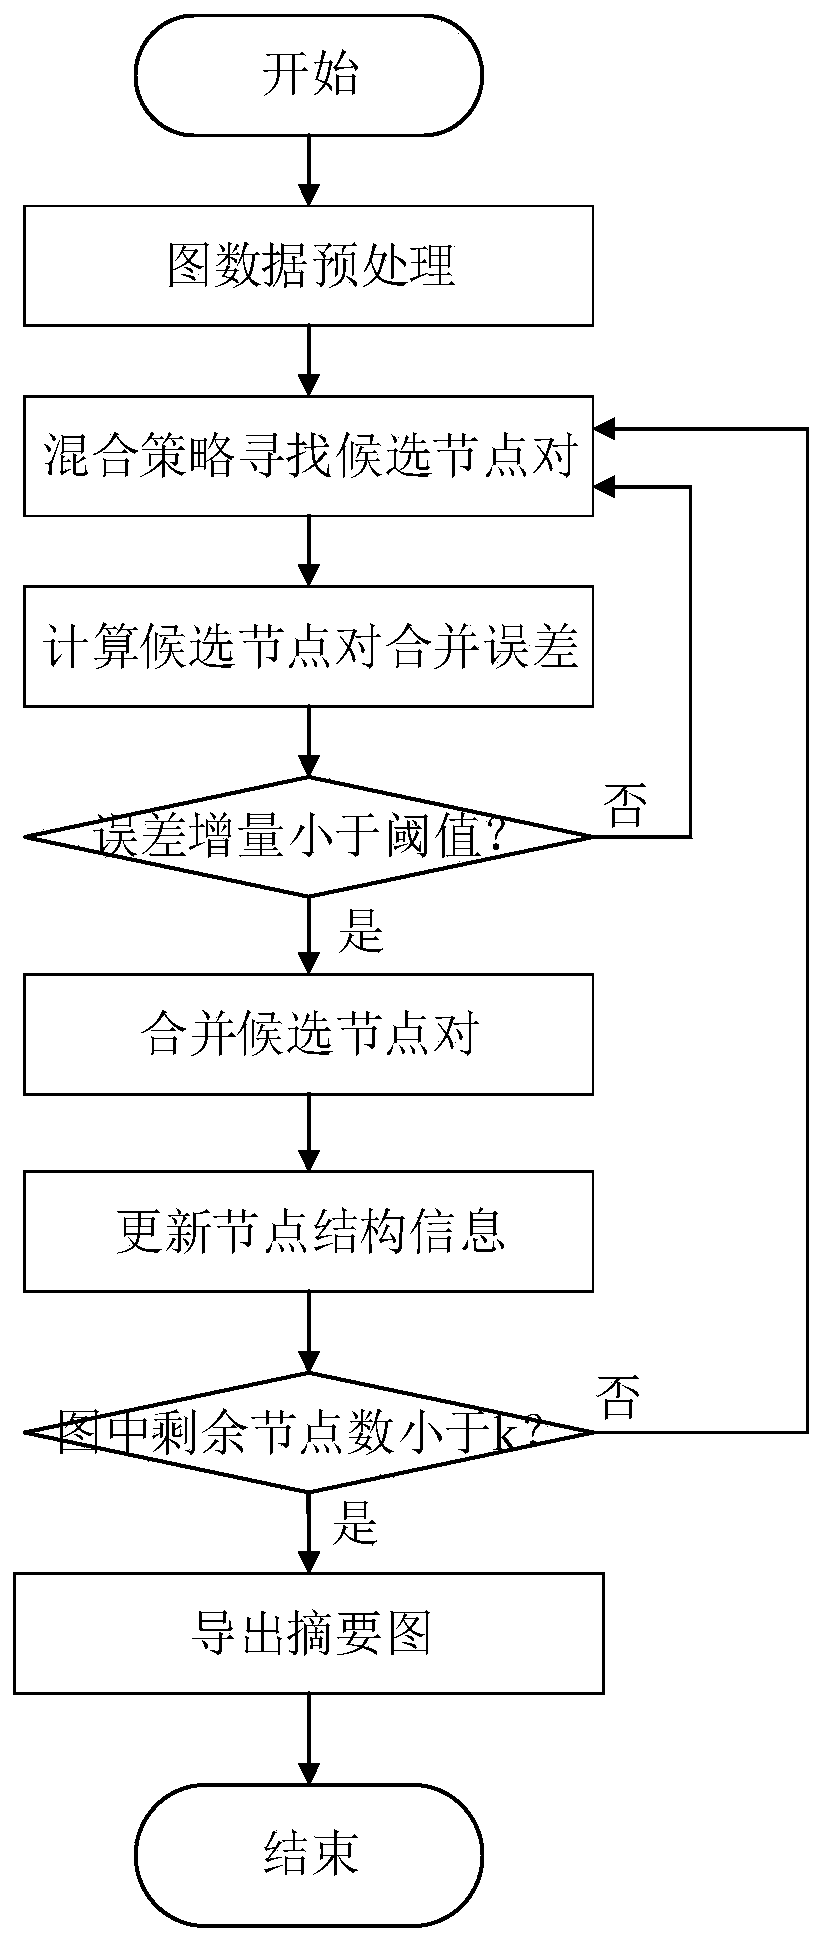 Parallel graph abstracting method based on attribute graph